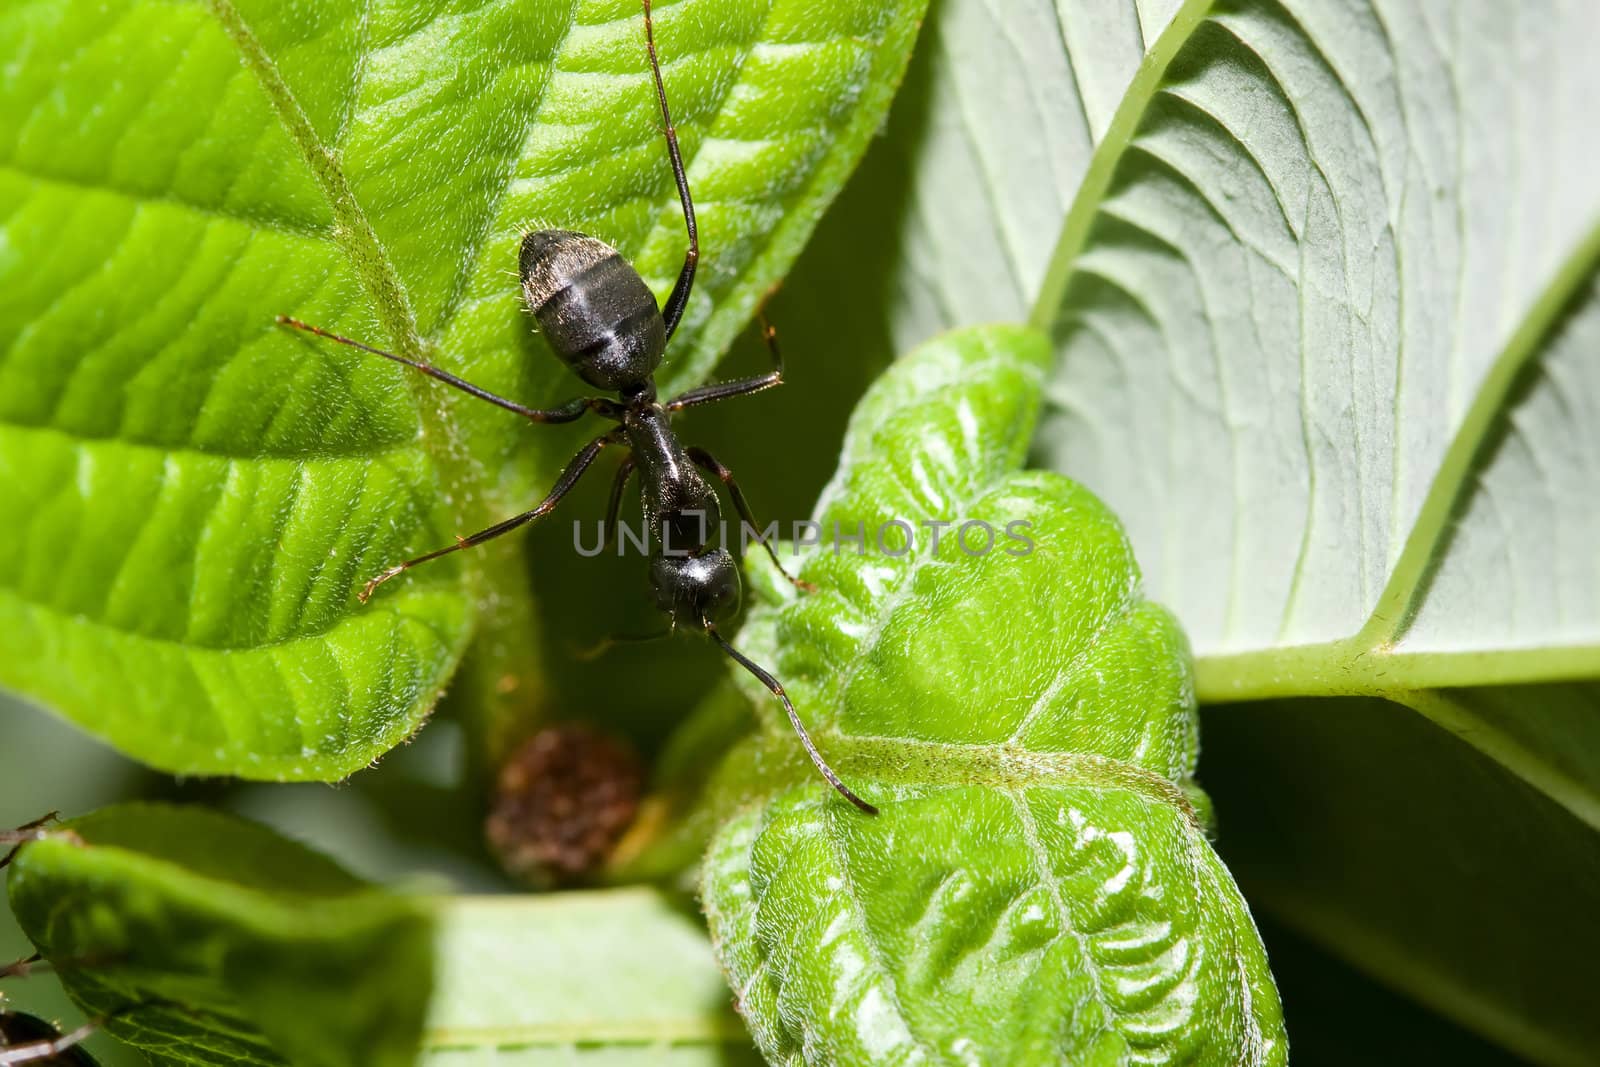 A Black Ant standing on a Leaf.